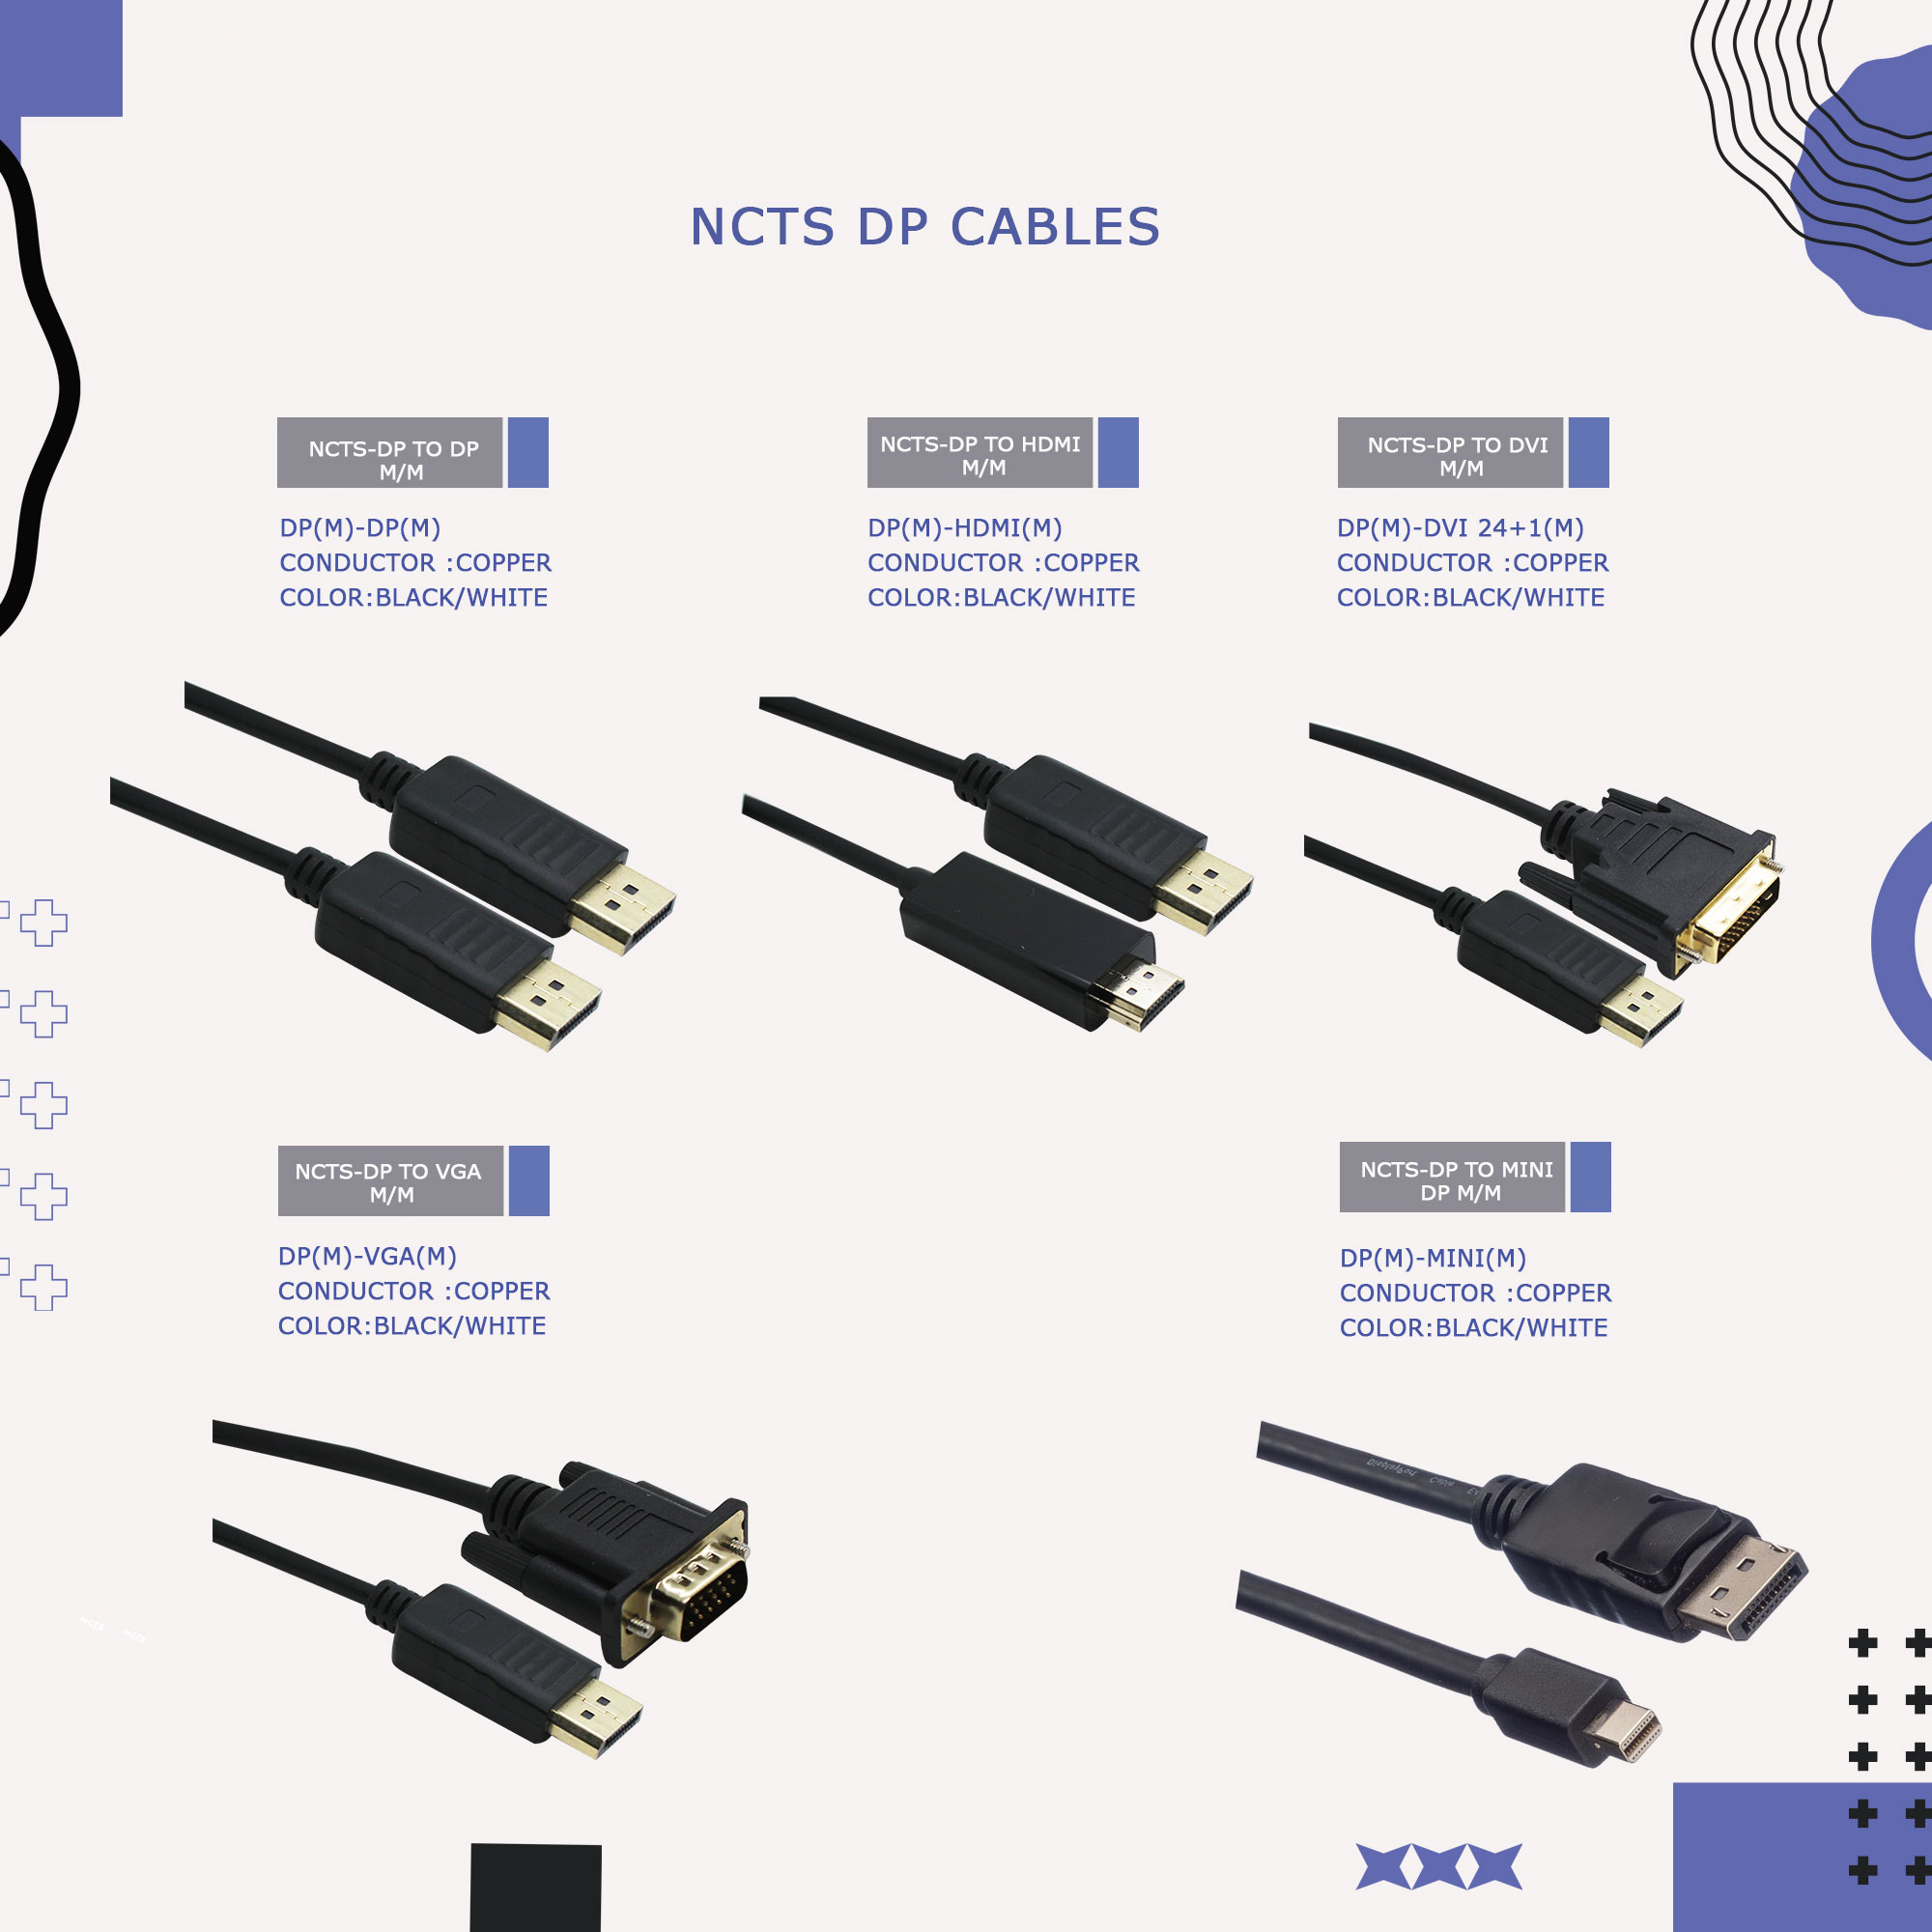 NCTS DP CABLES